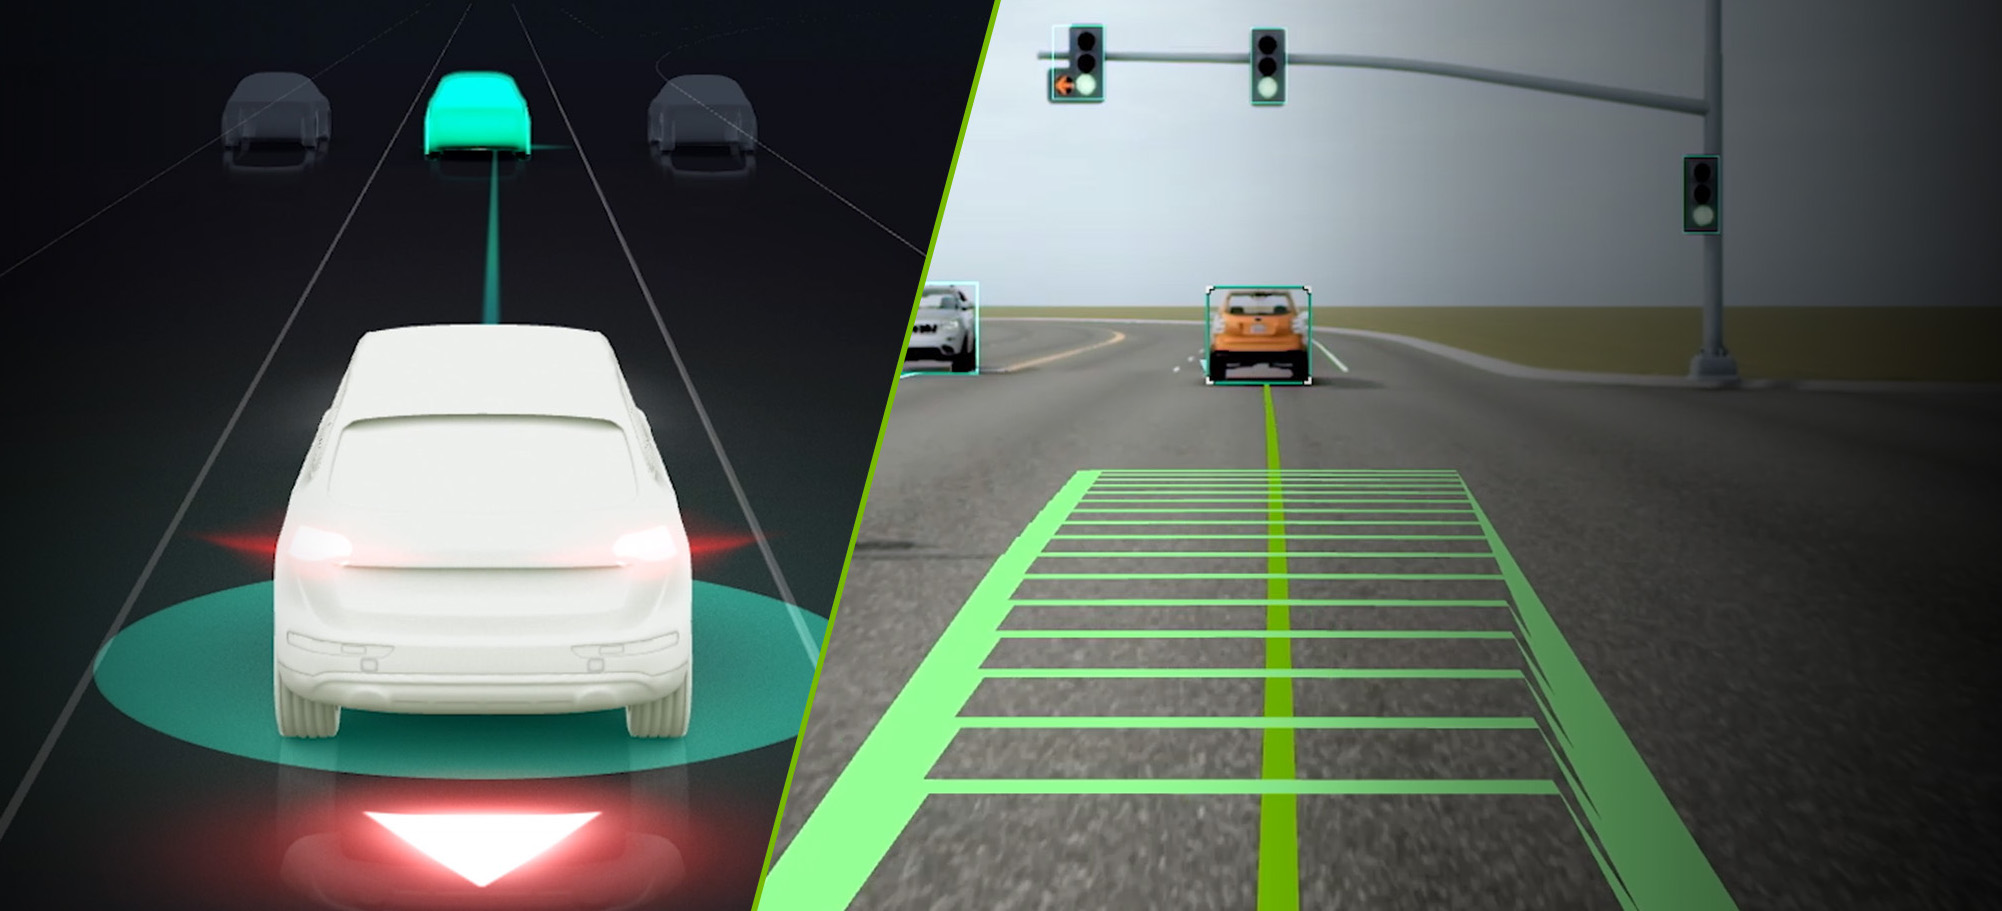 Mobileye CEO clowns on Nvidia for allegedly copying self-driving car safety scheme | TechCrunch